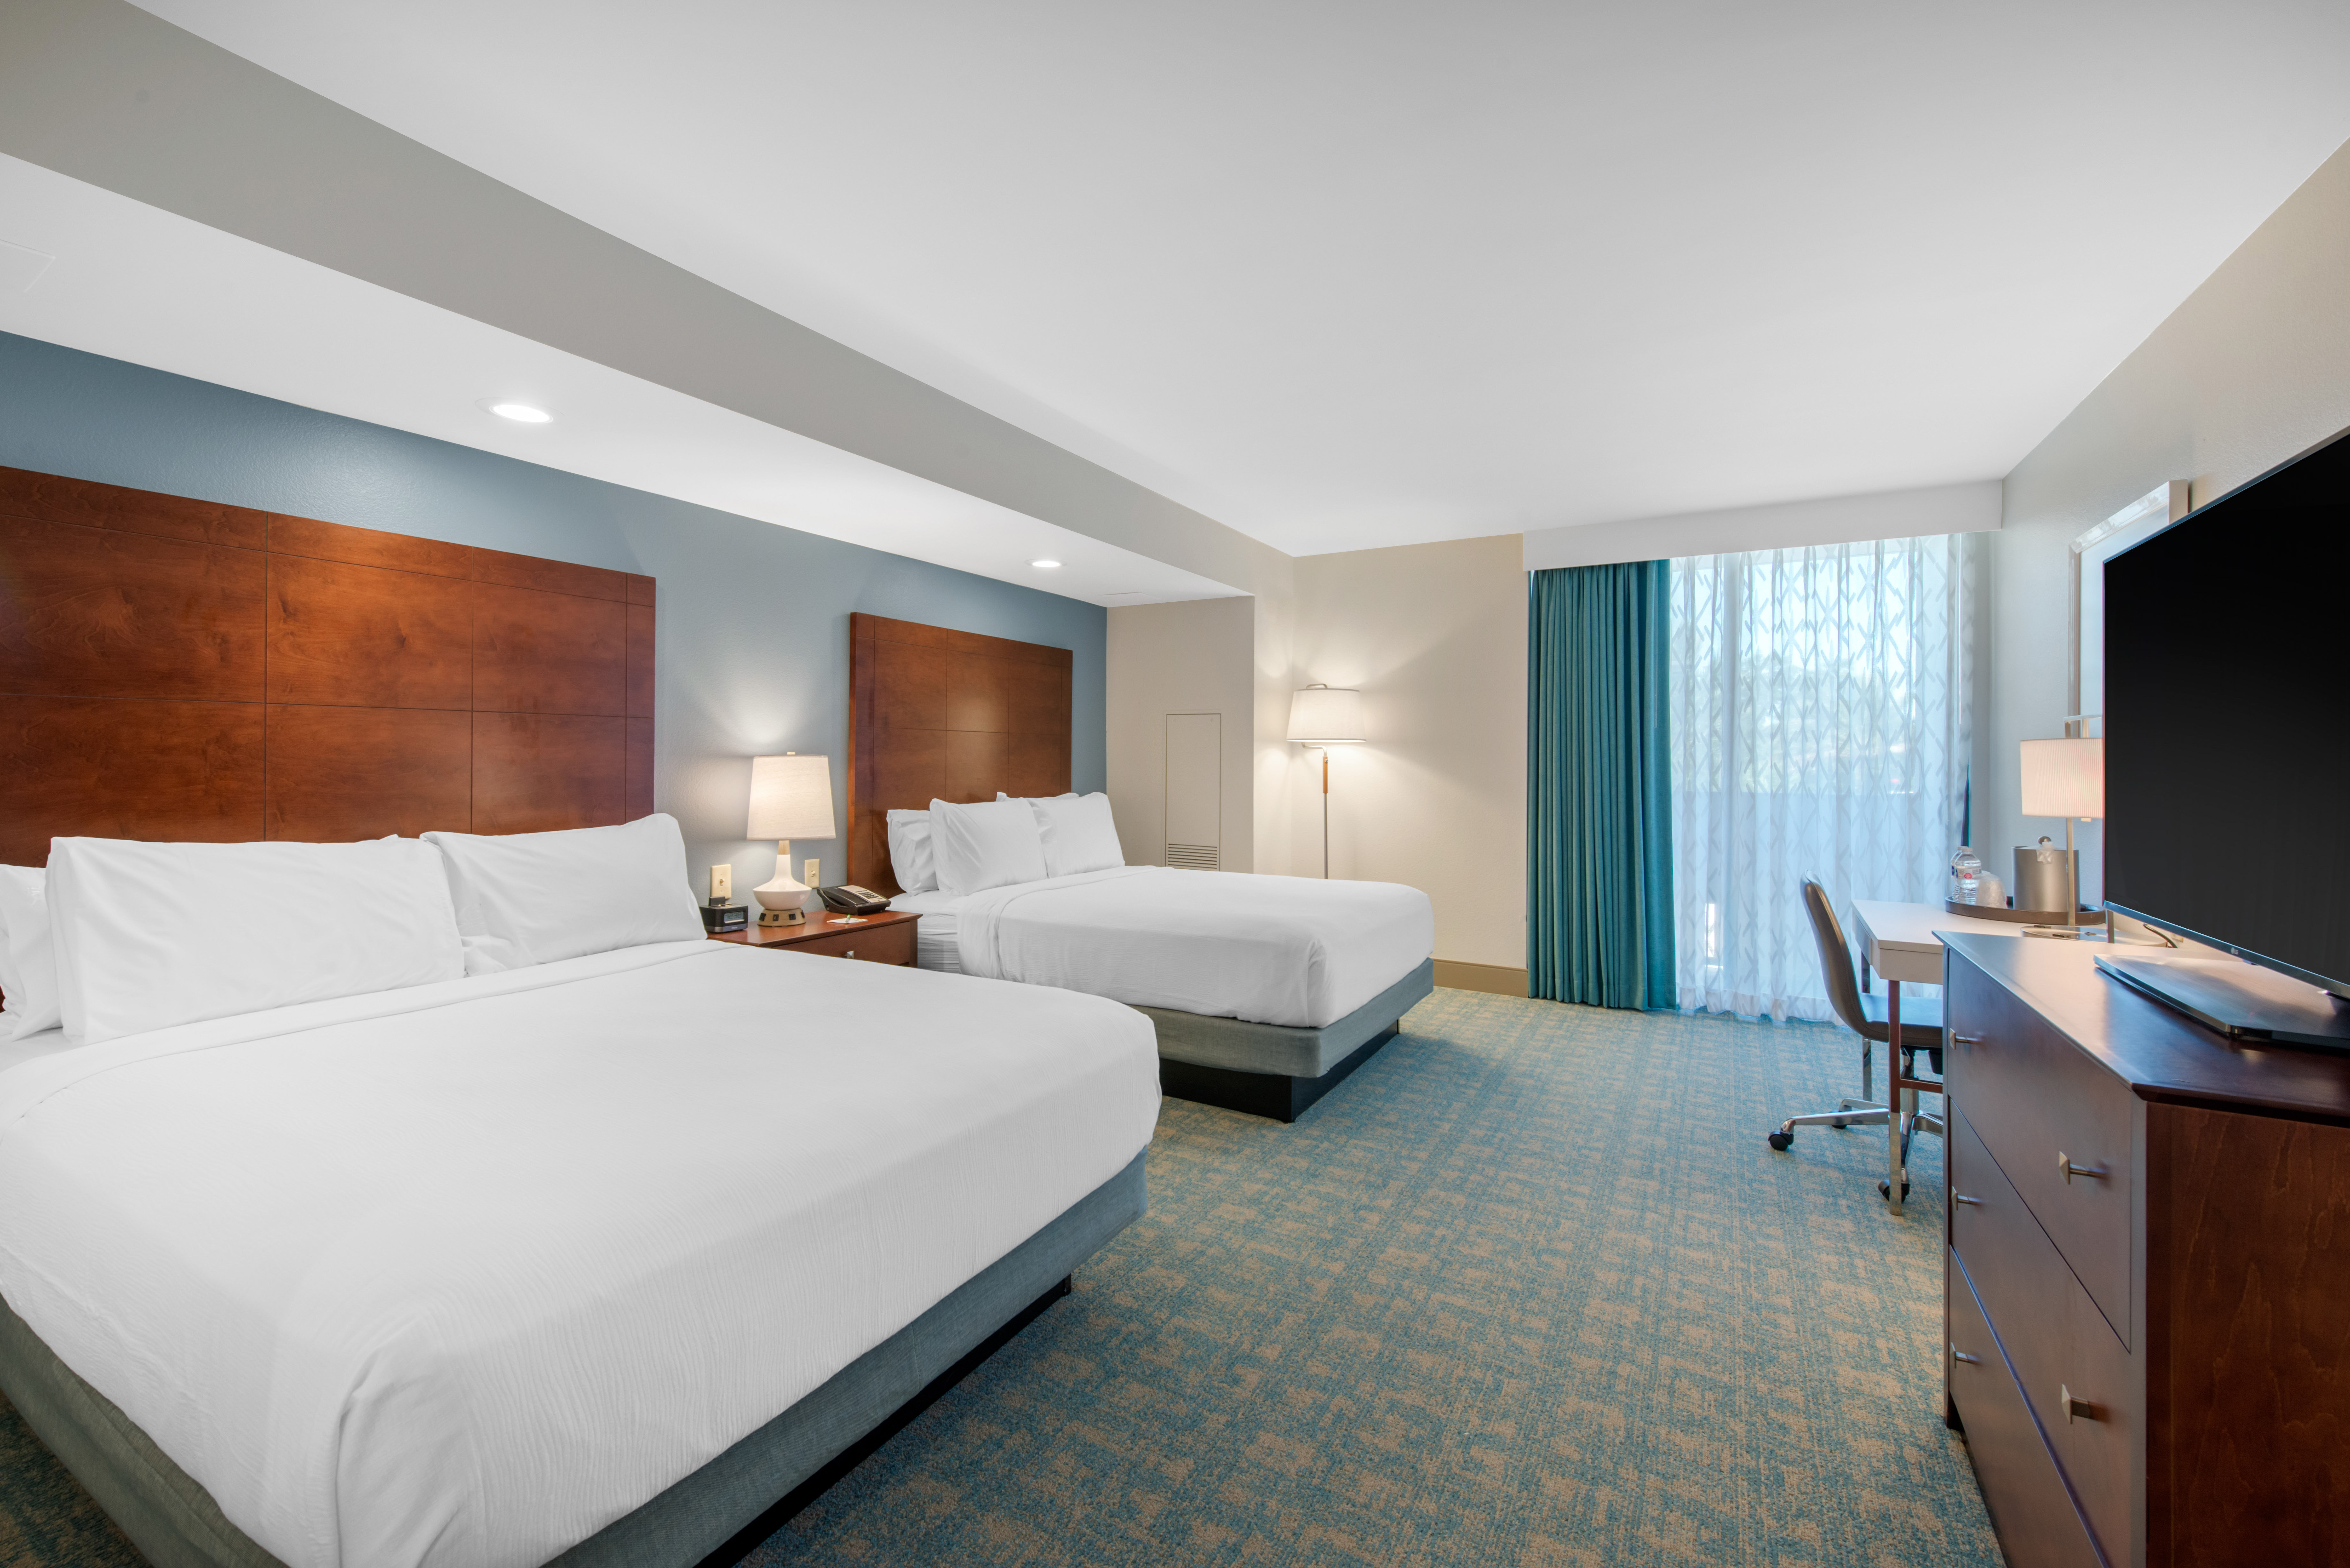 Guestrooms in the wing feature warm wood tone furniture